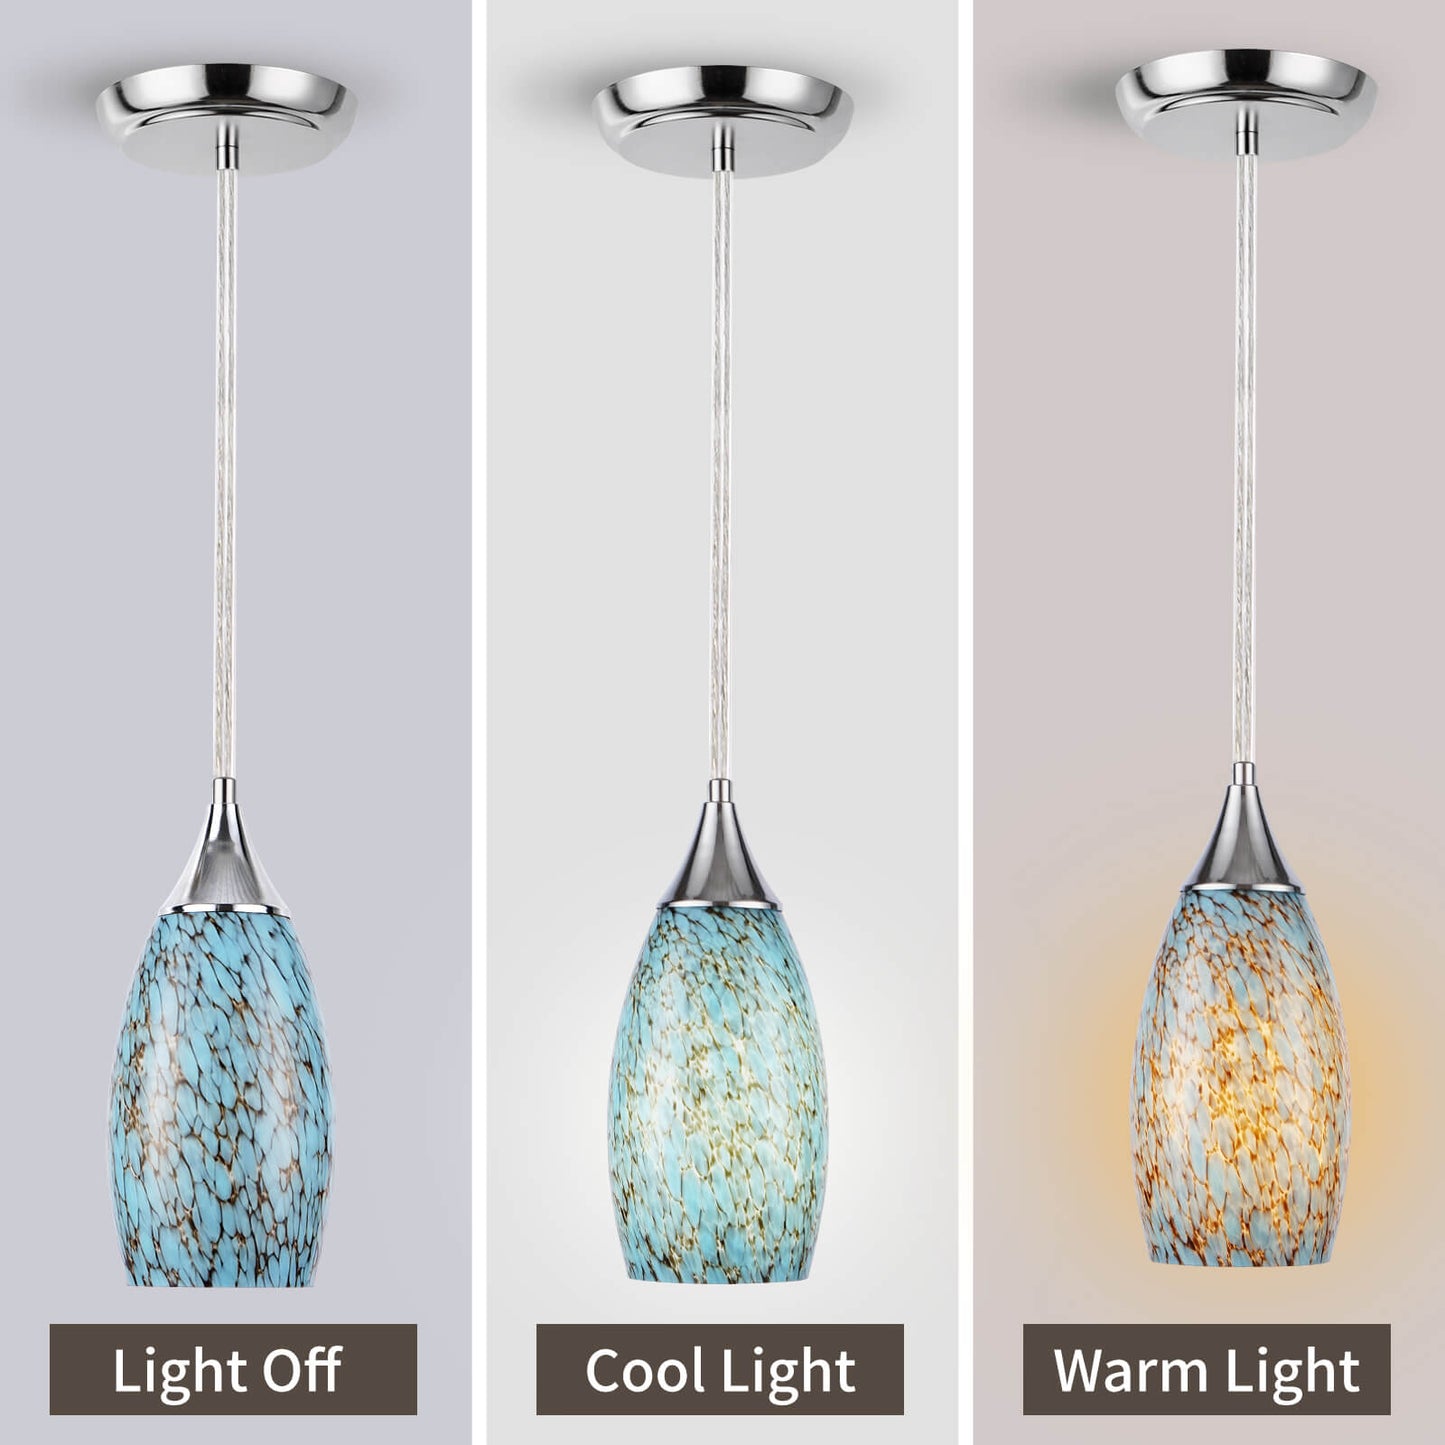 Porseme Pendant Light Features Kitchen Island Hanging Lamp with Plug-in Adjustable Cord Handcraft Art Glass Shade E26 Socket Bulb Included for Home Kitchen Sink Make-up Table Counter